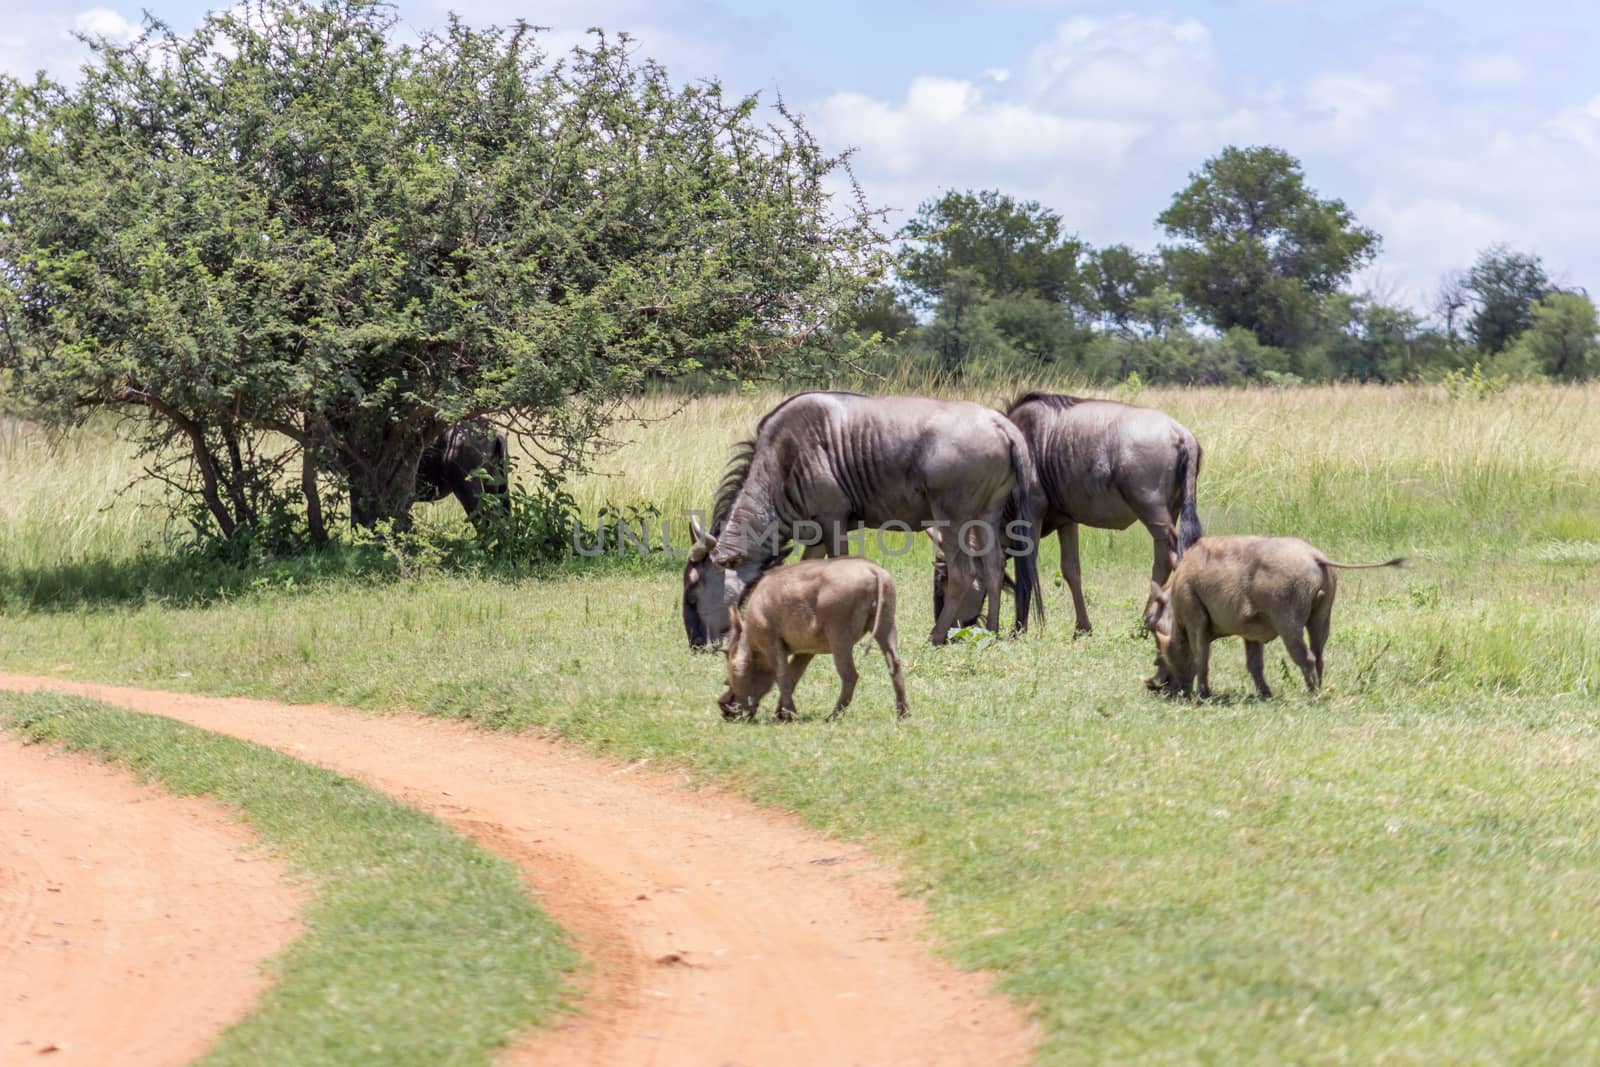 Blue wildebeest and common warthog grazing together